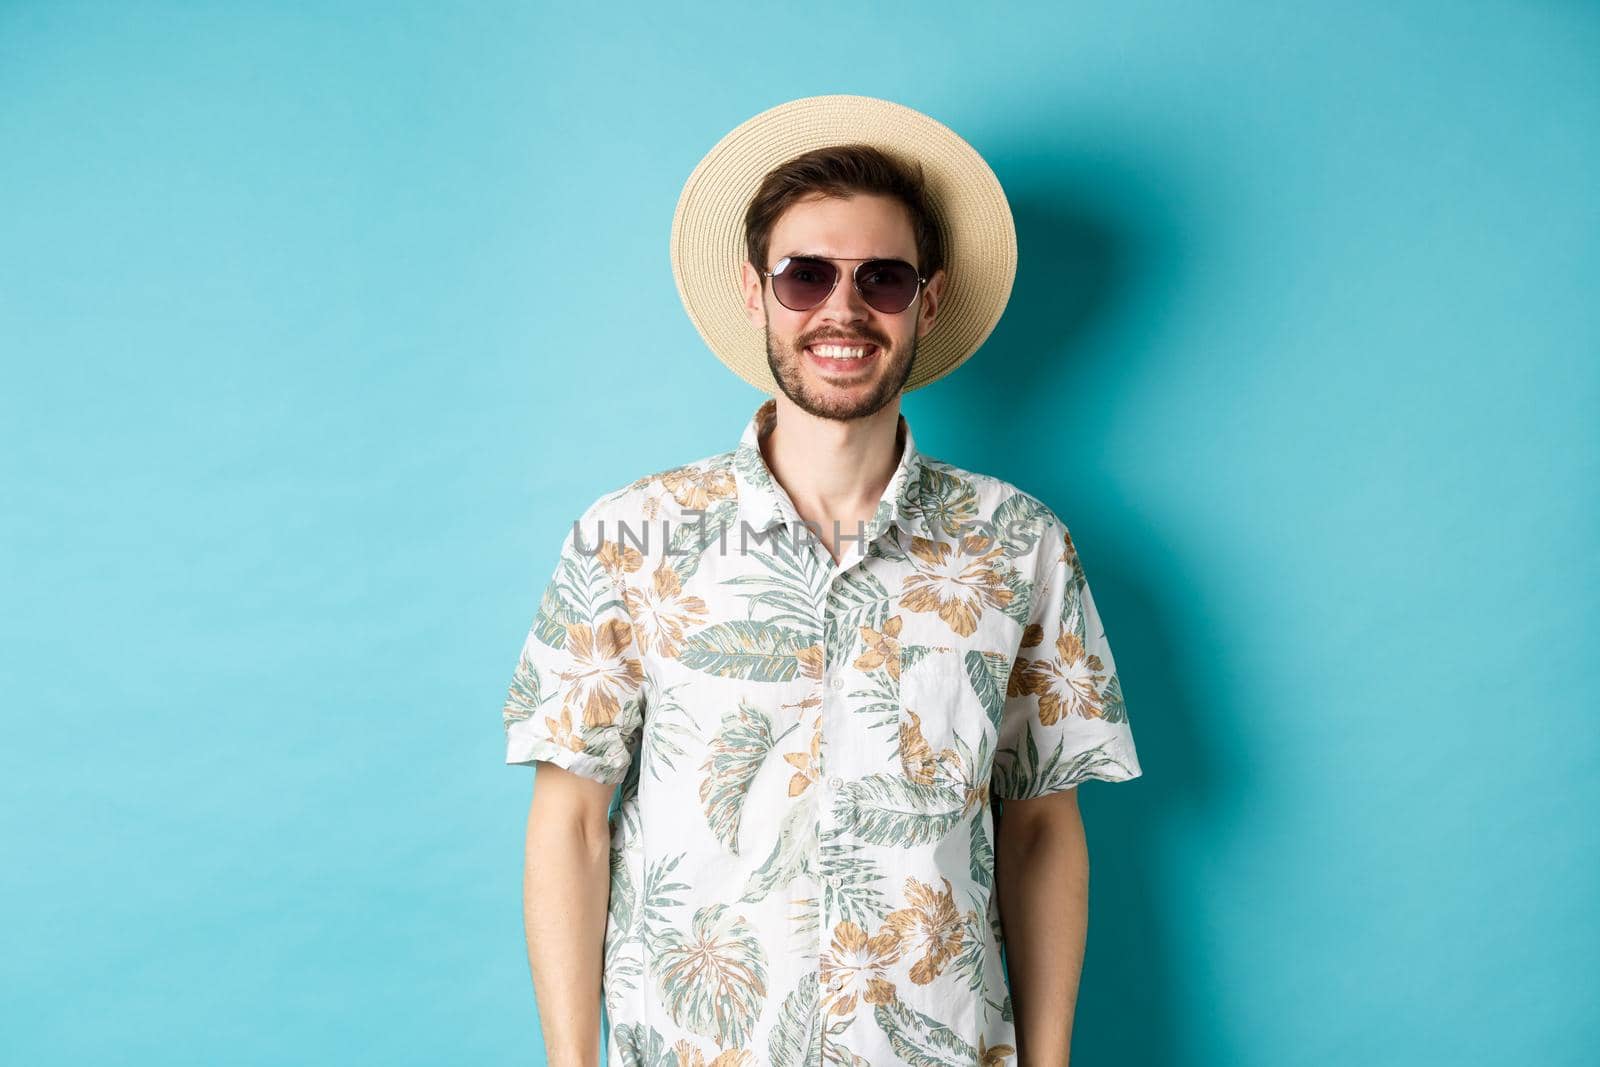 Handsome smiling guy in sunglasses and summer shirt, enjoying vacation on tour, standing on blue background.